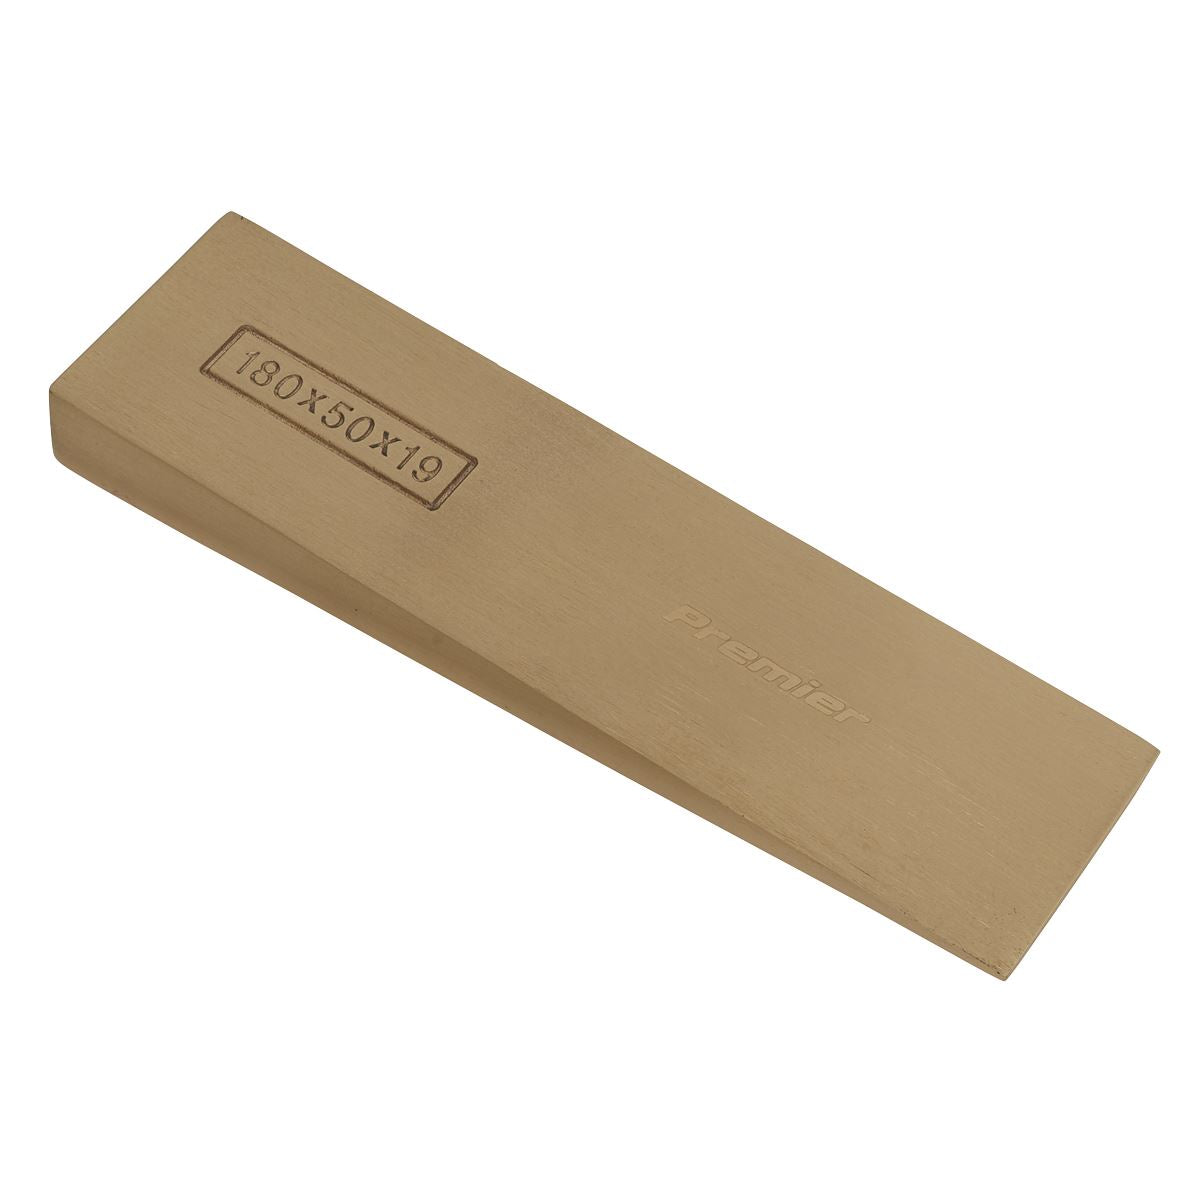 Sealey Premier Wedge 180 x 50 x 19mm - Non-Sparking